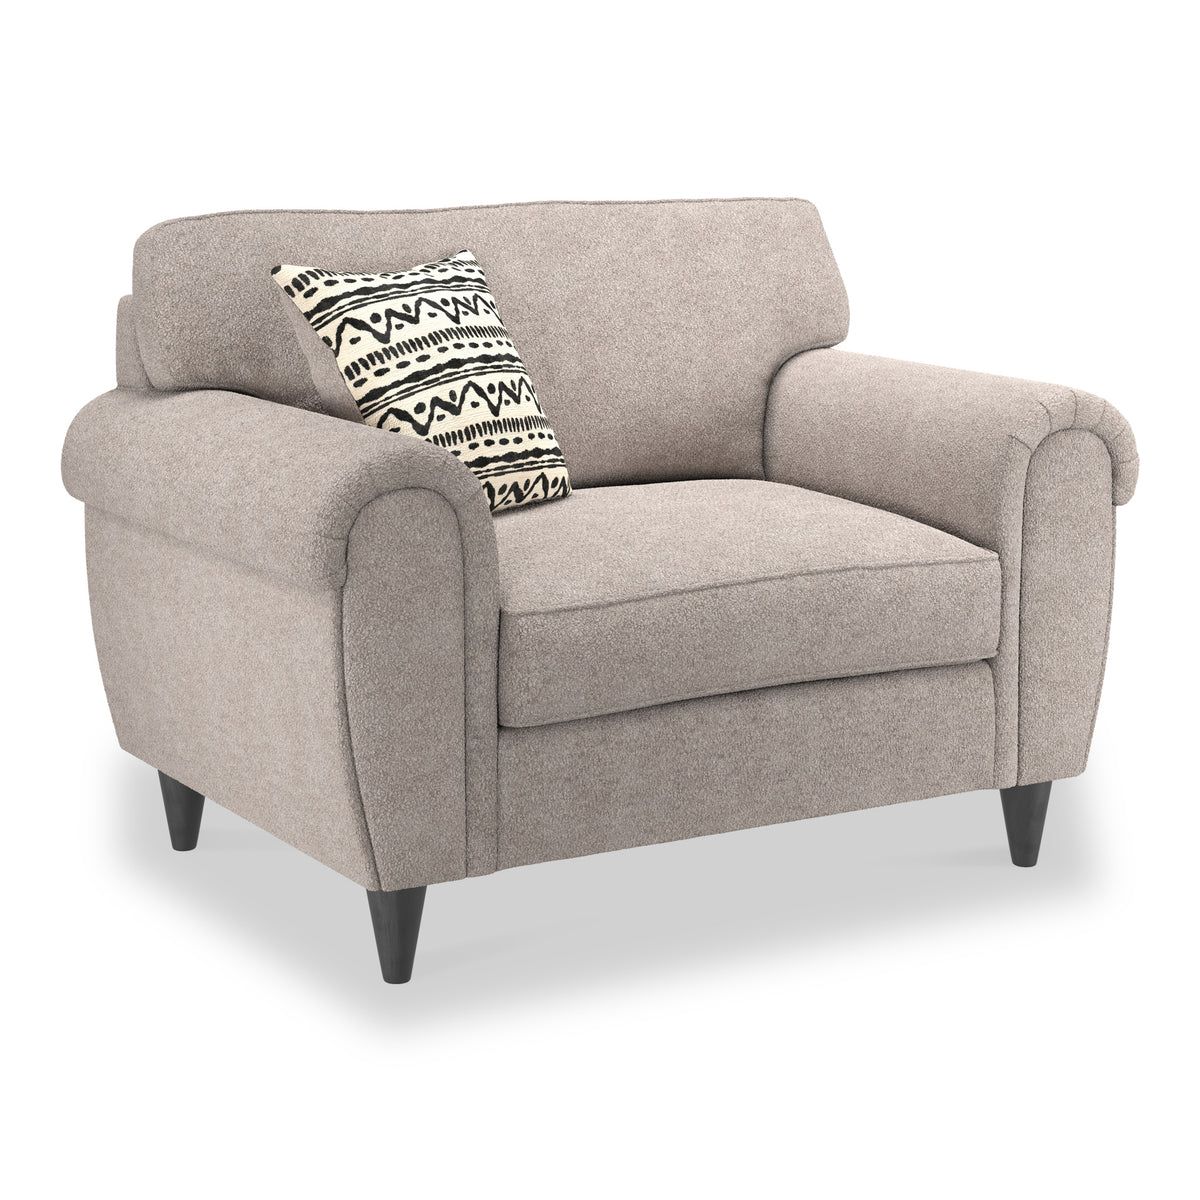 Jessie Mink Snuggle Armchair from Roseland Furniture